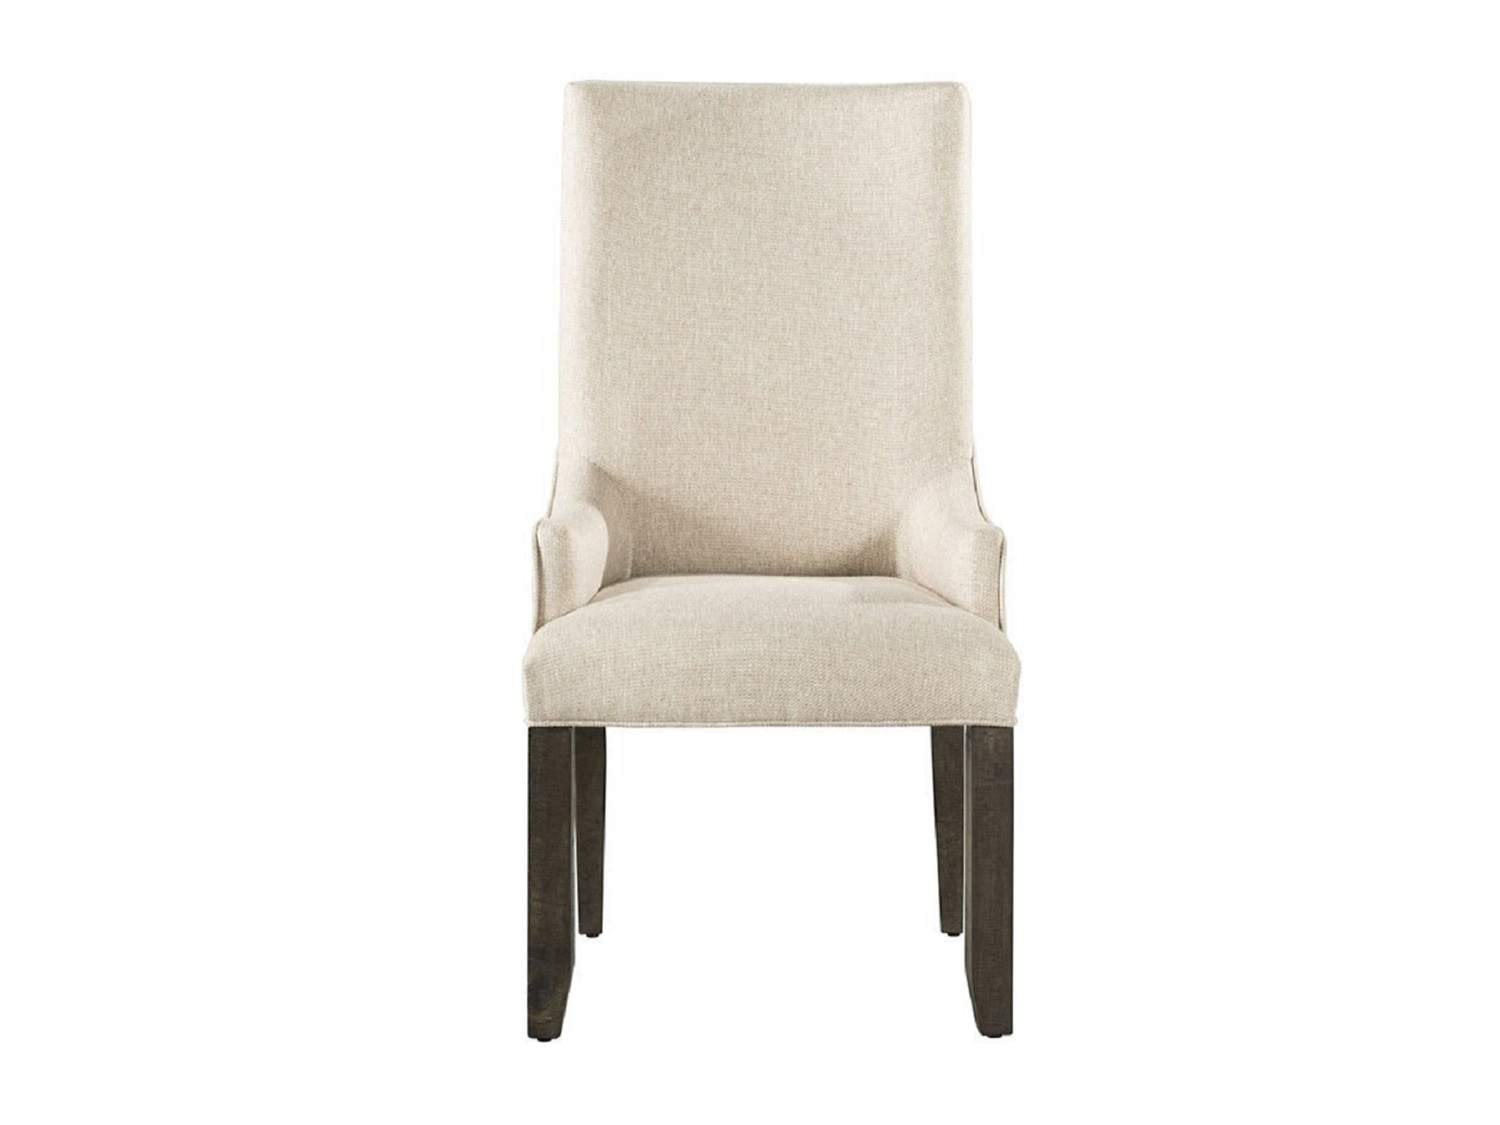 BRIER Upholstered Chair - Front